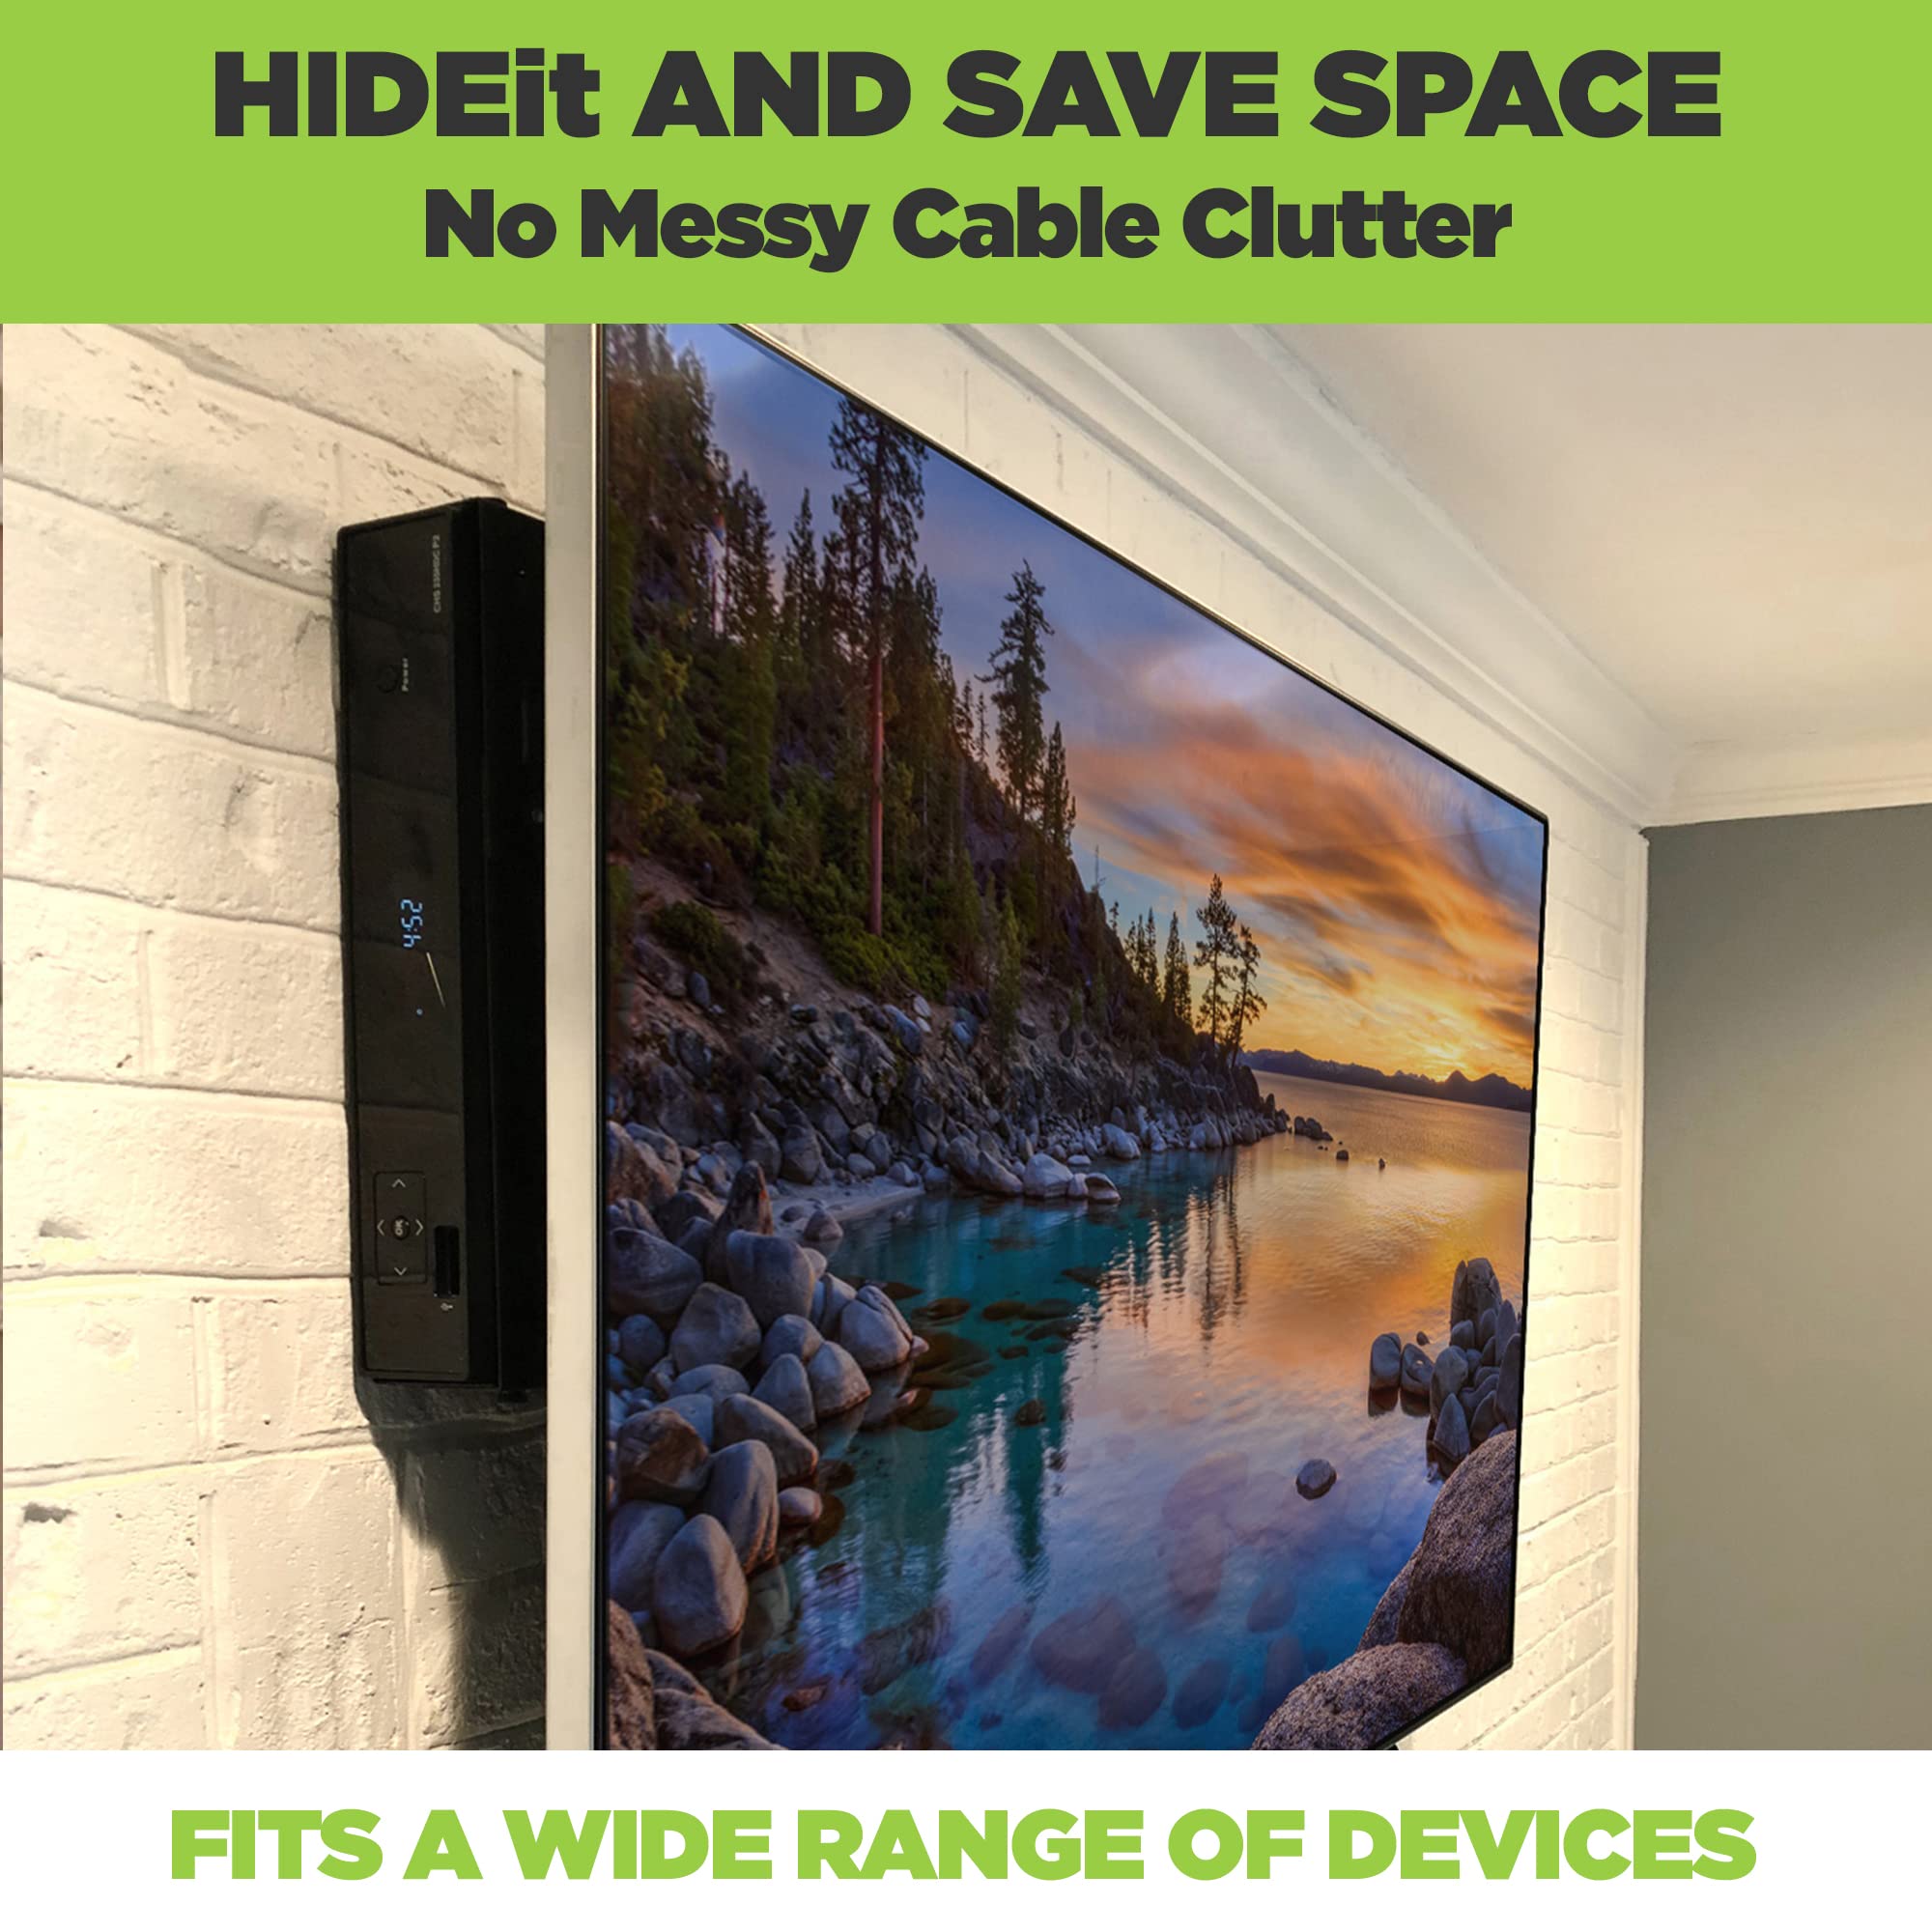 The HIDEit Uni-M fits a wide range of devices including cable boxes, routers and modems